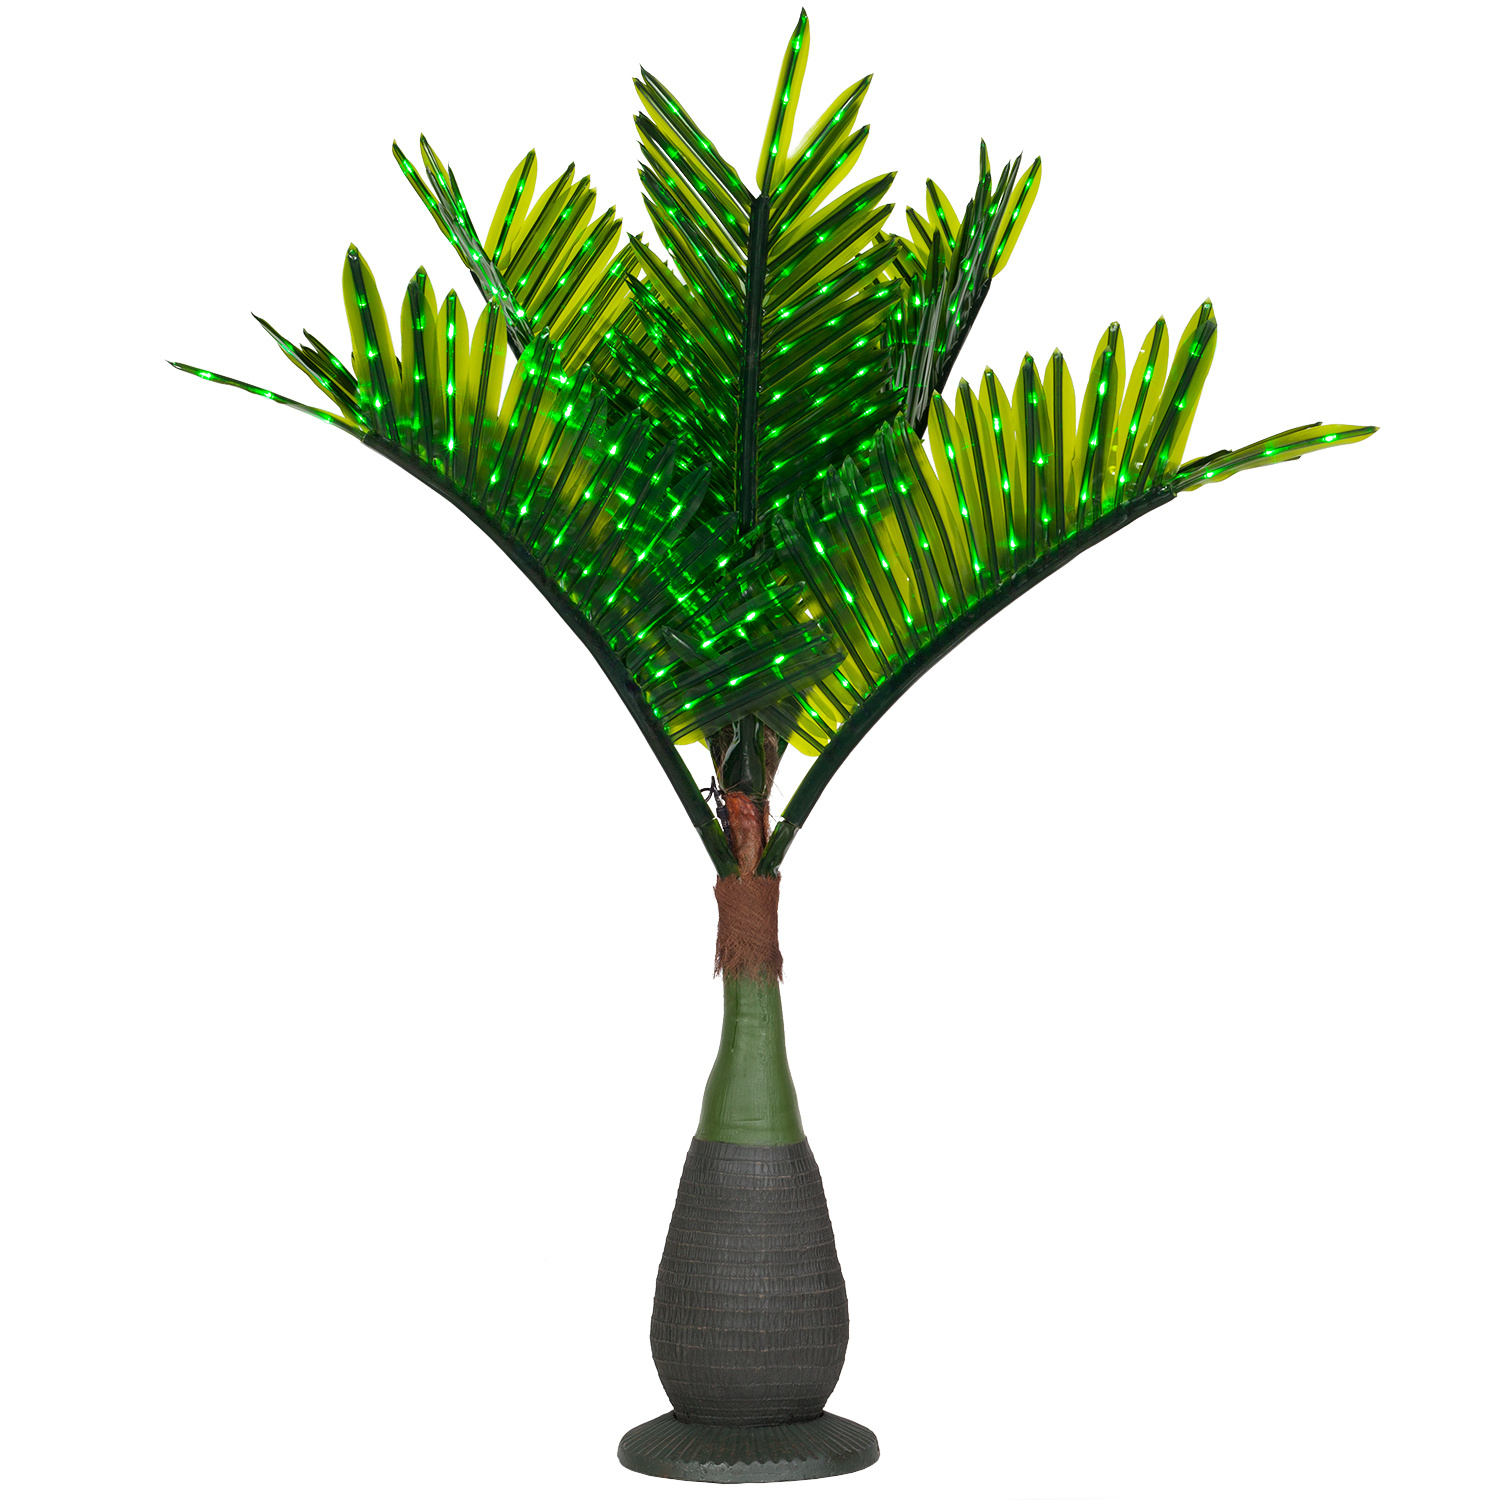 Lighted Palm Trees - 7.5' LED Bottle Palm Tree - Natural Green